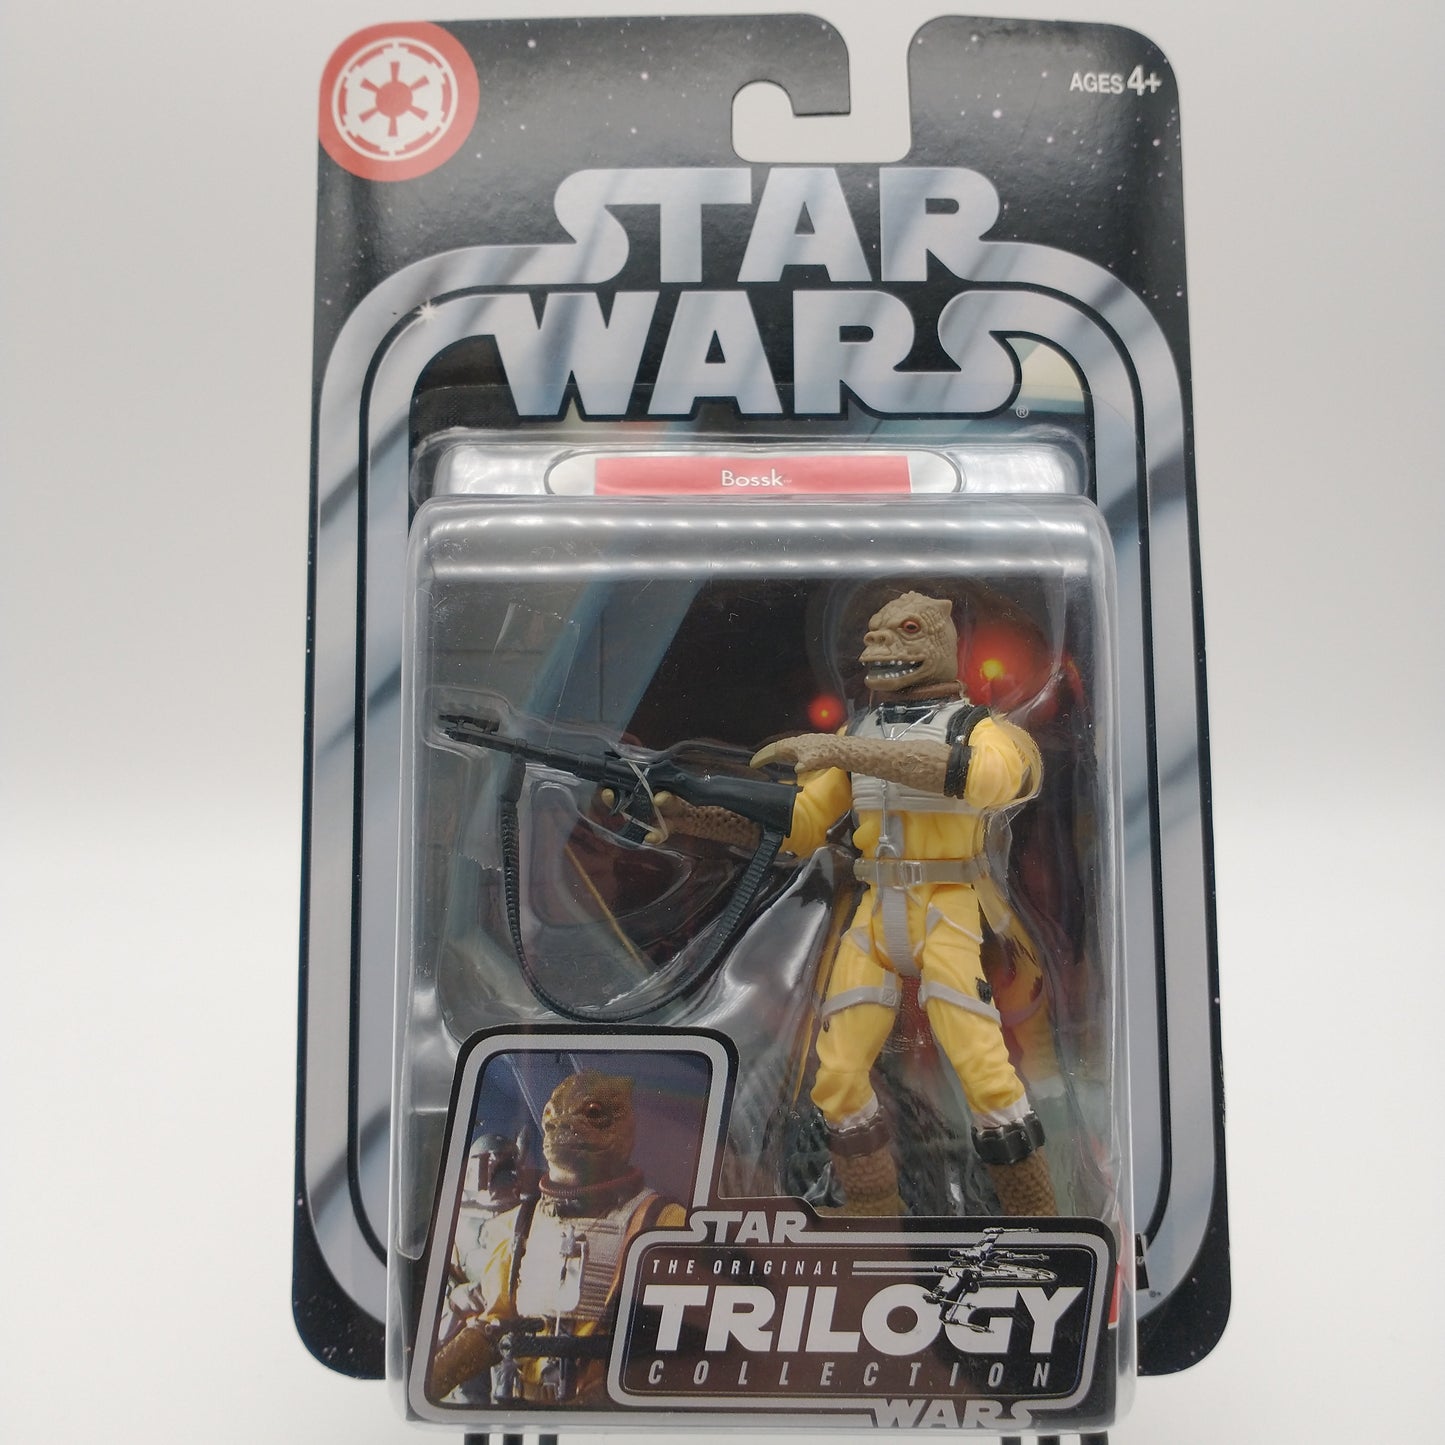 The front of the cart and bubble are intact. The action figure inside is a lizard humanoid wearing a yellow jumpsuit, and holding a large gun.